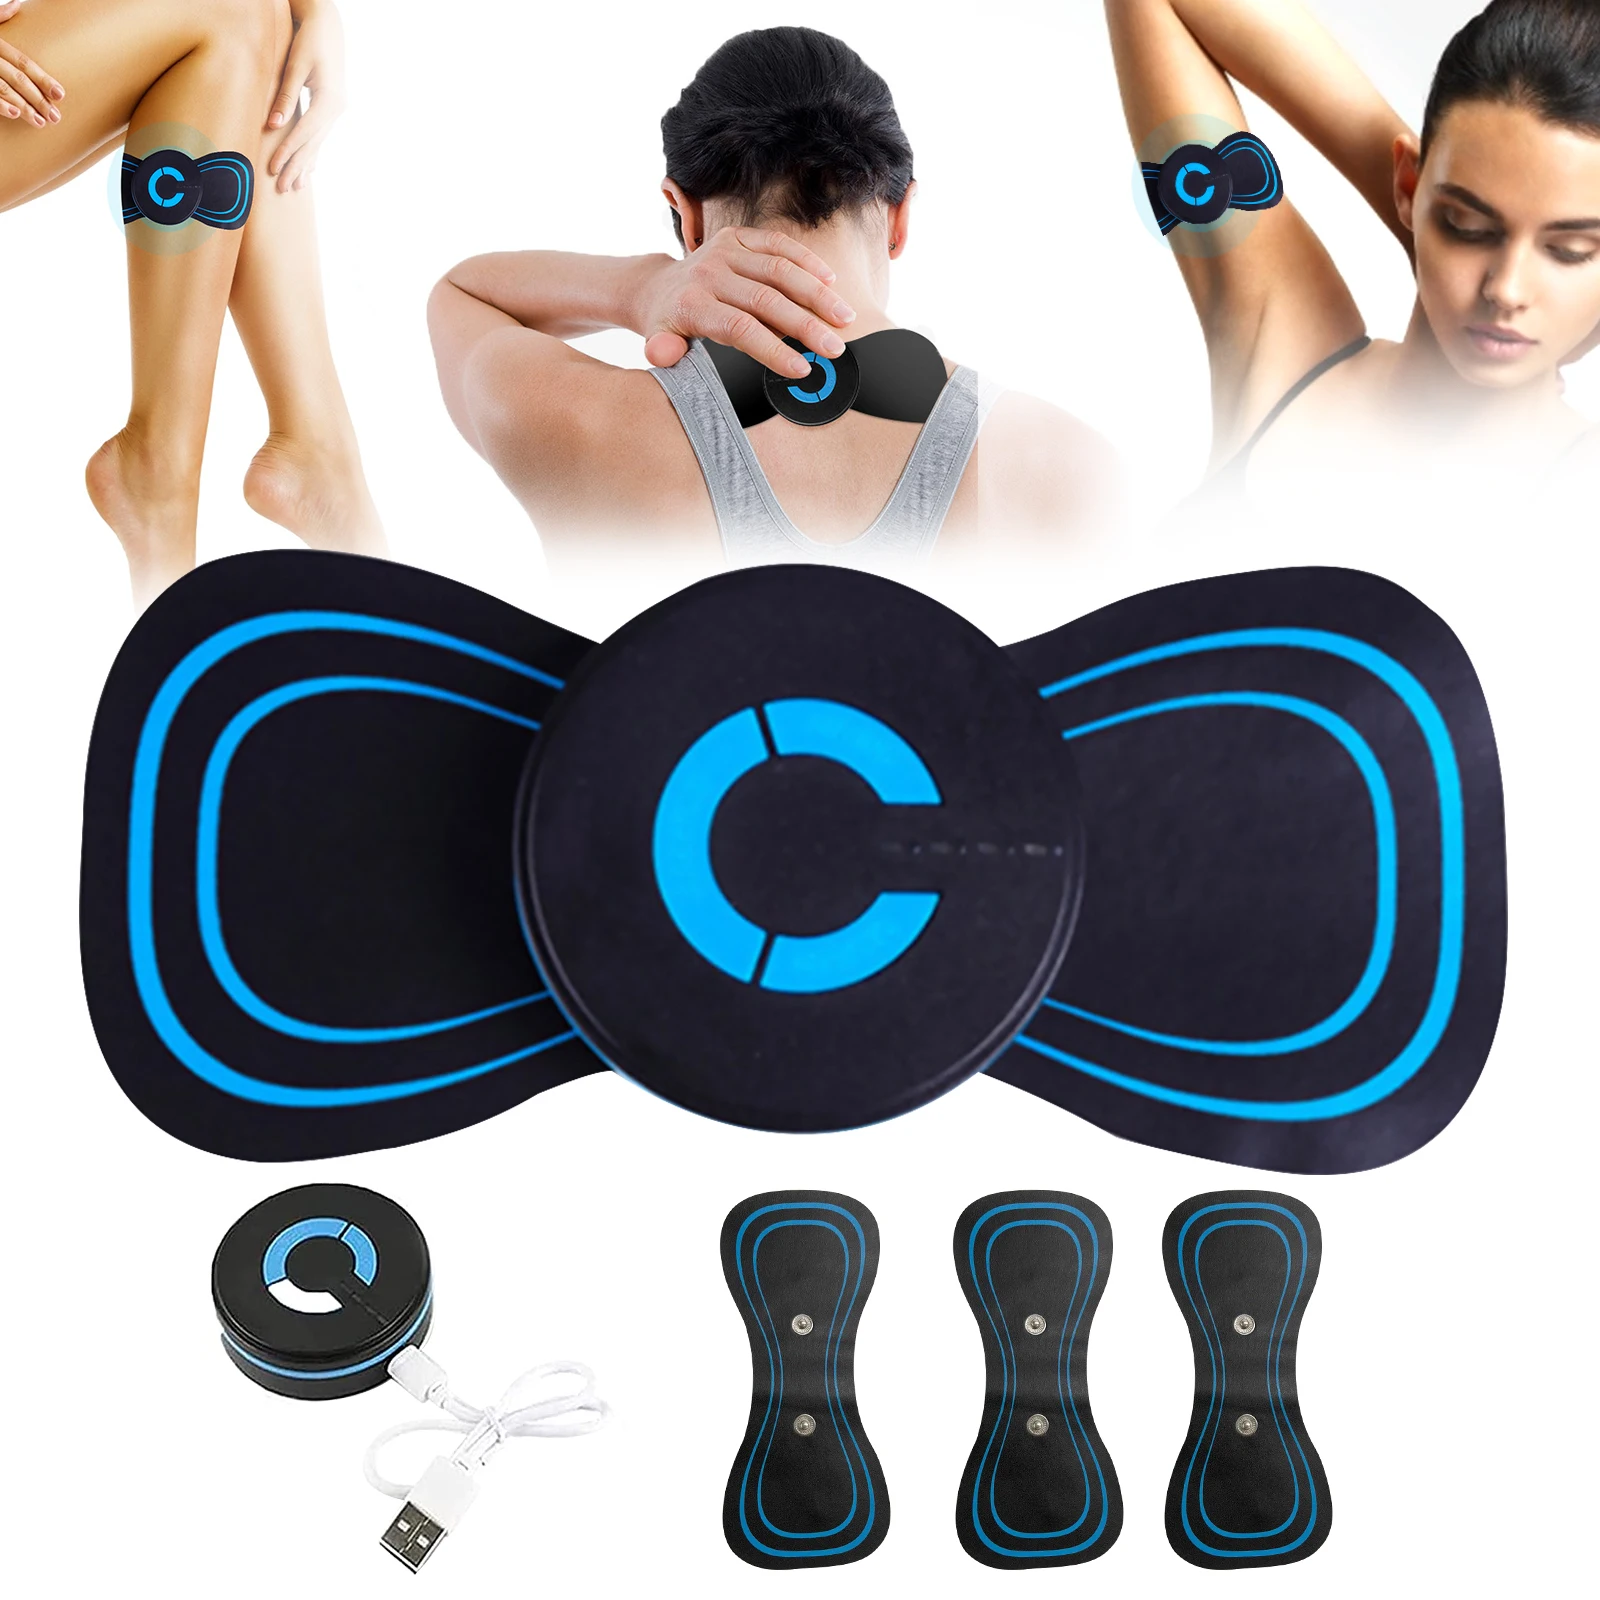 https://ae01.alicdn.com/kf/S01c2e26c62c54a2c9b60785aa402a60be/Neck-Massager-Ems-Electric-Cervical-Massage-Patch-Low-Frequency-Pulse-Muscle-Stimulator-Pads-Pain-Relief-Relaxation.jpg